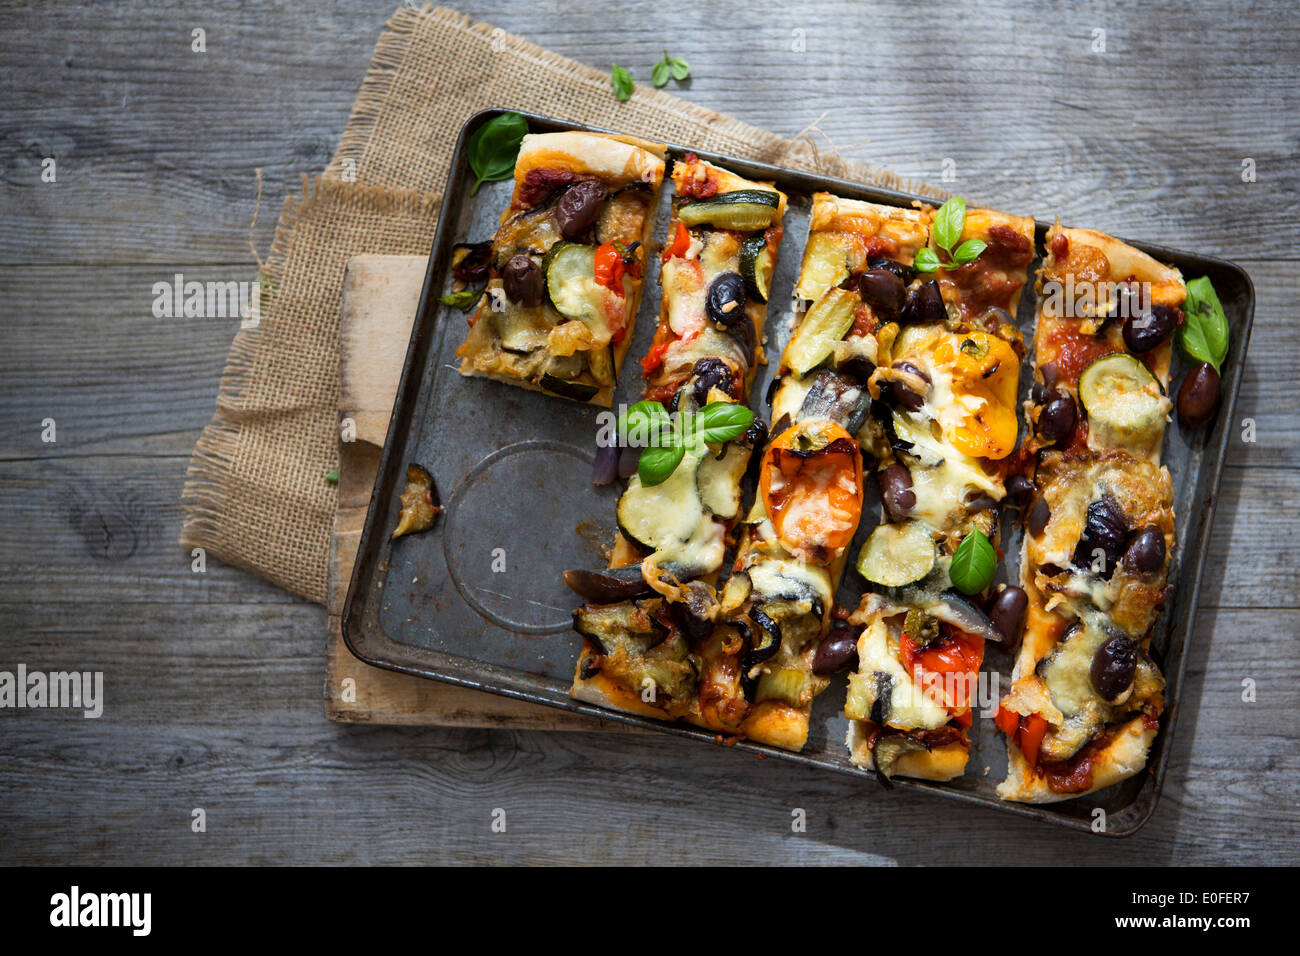 Homemade Roasted Vegetable Pizza with Olives, Basil and Peppers, Sliced Stock Photo